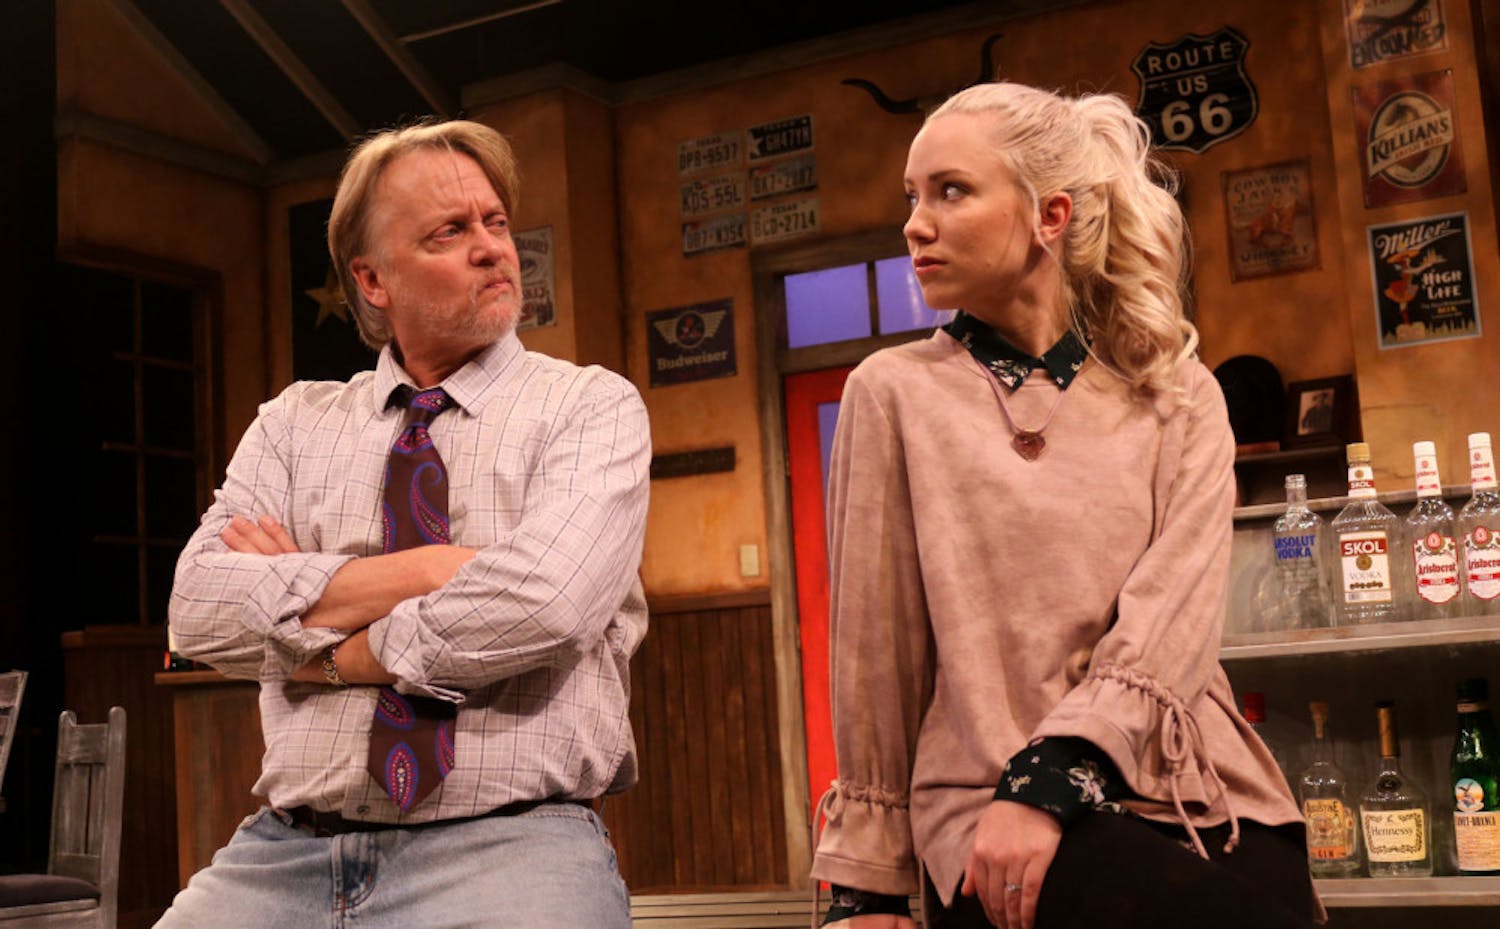 Bryan Mercer and Marissa Toogood play Walter and Marley in the Hippodrome's&nbsp;"Lone Star Spirits." The two characters have a strained father-daughter relationship, which is one of the key&nbsp;focal points of the play.
&nbsp;
&nbsp;